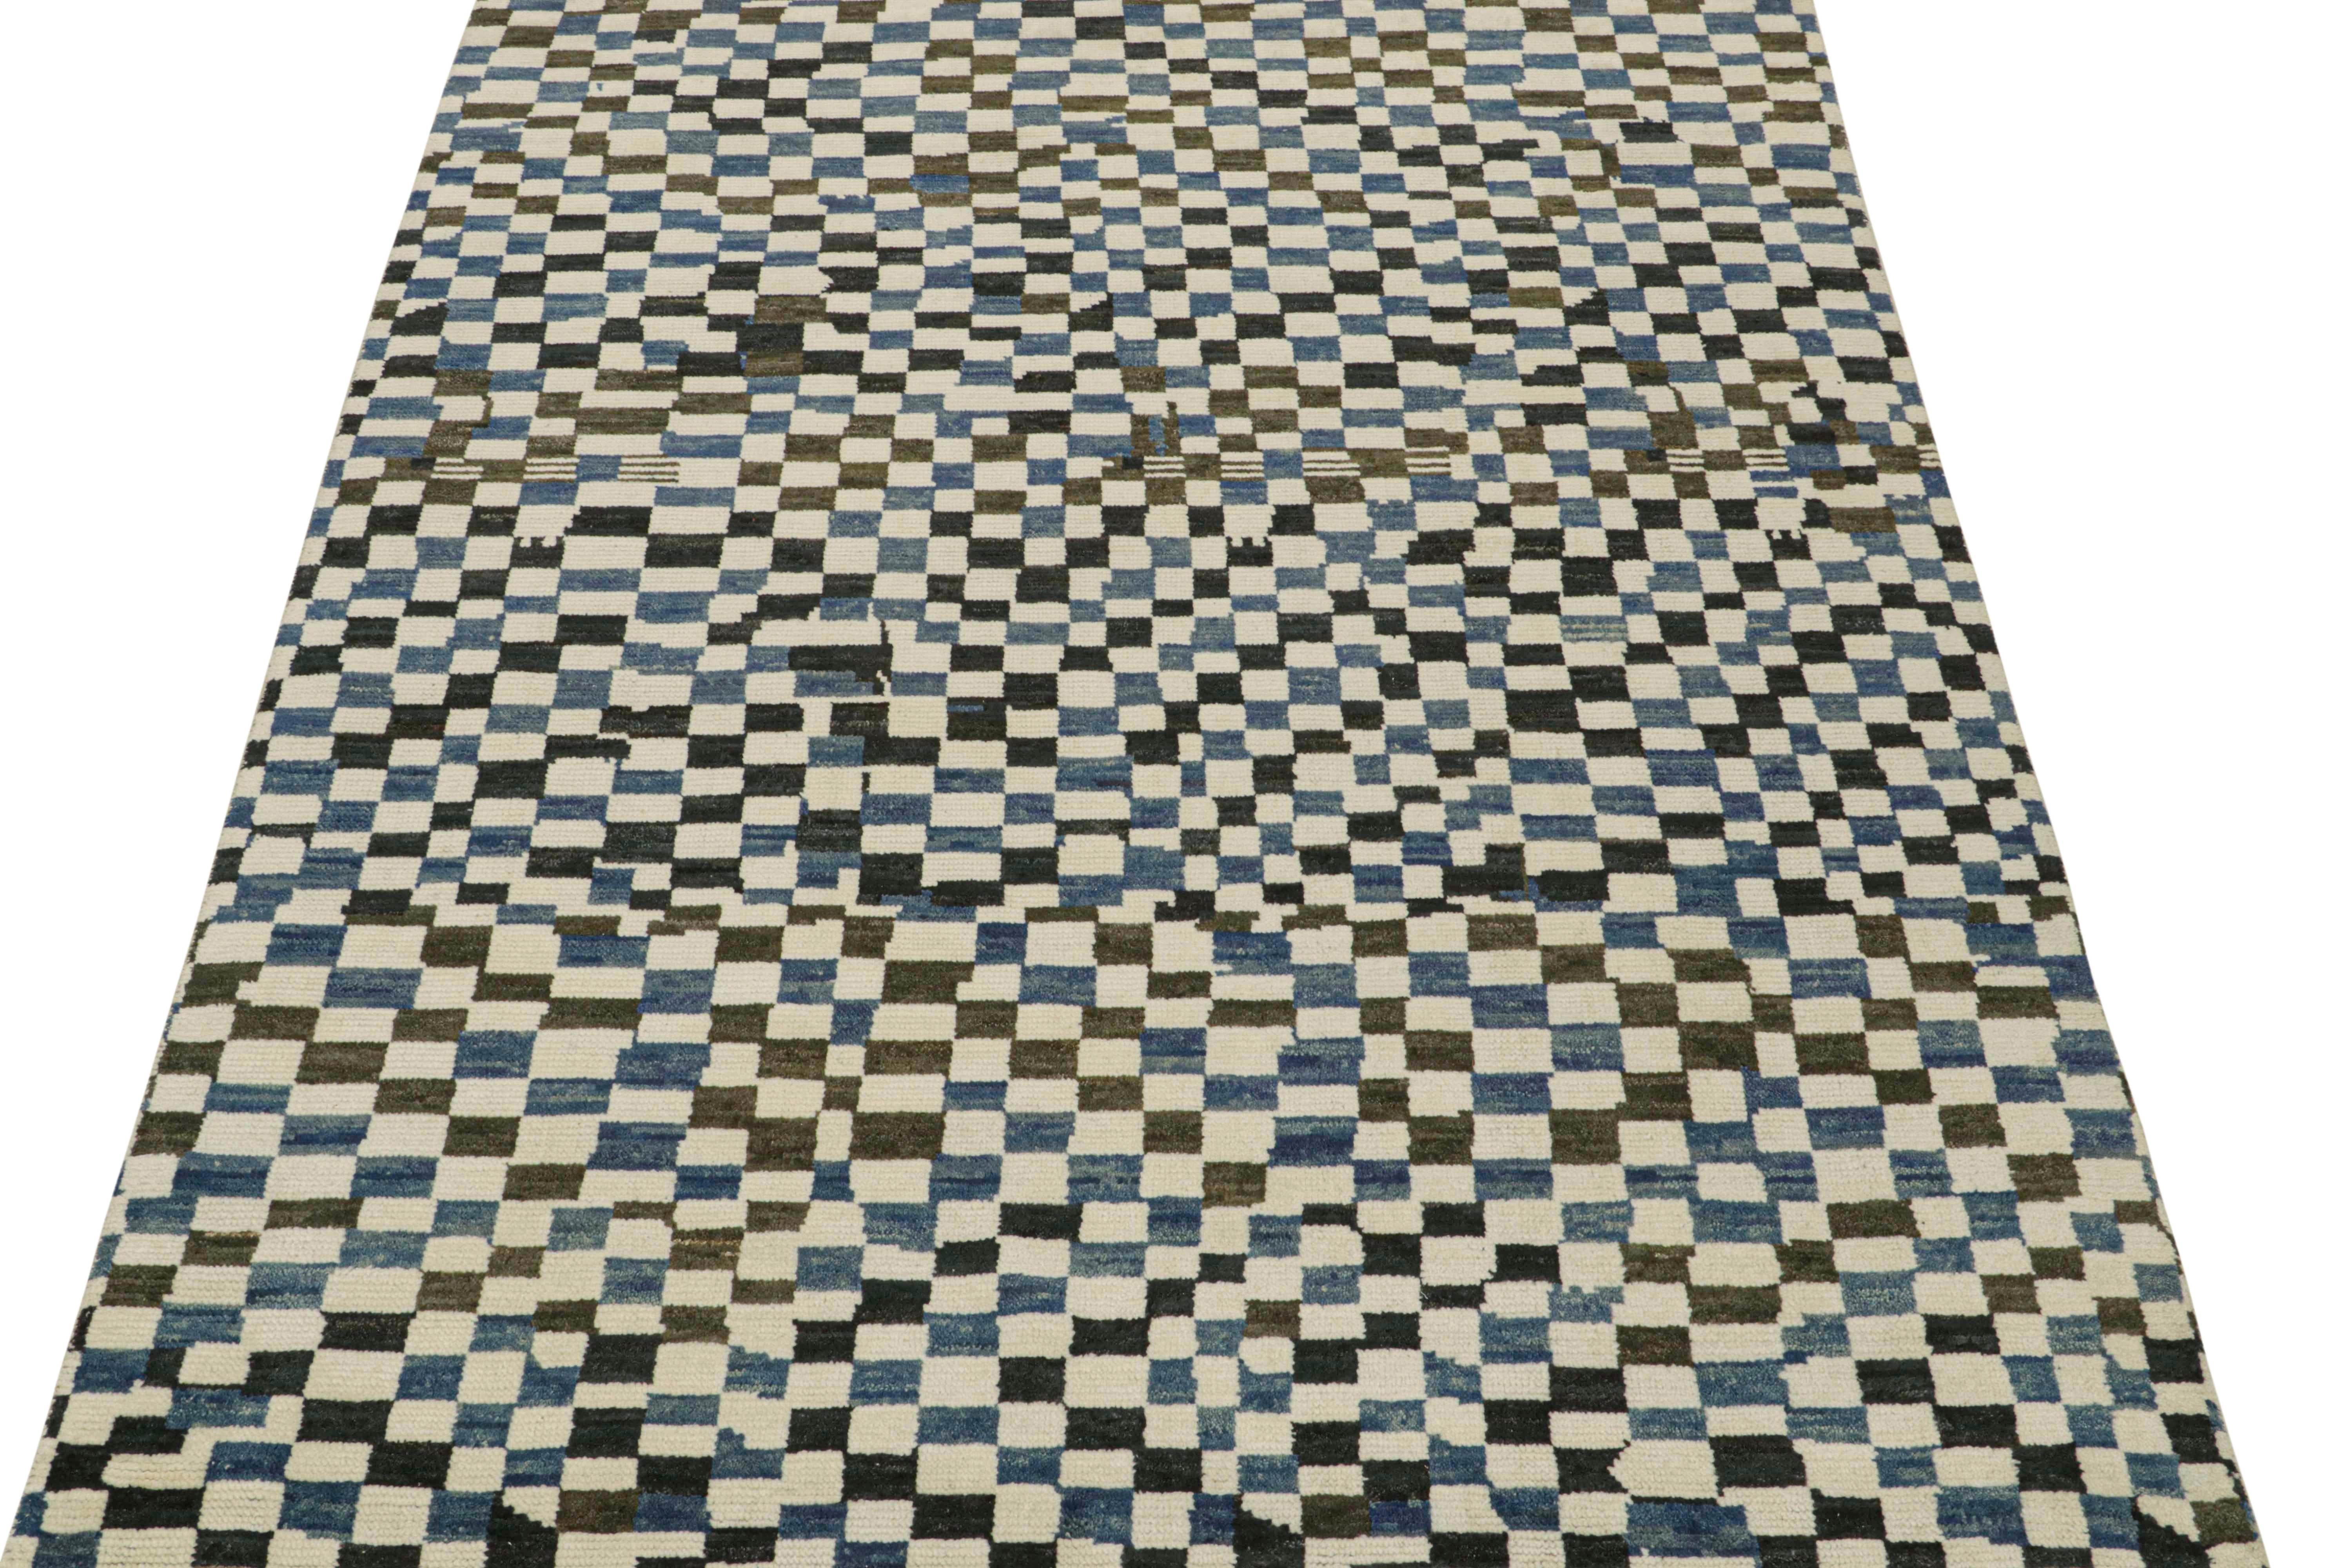 This 8x11 rug is a new addition to Rug & Kilim’s Moroccan rug collection. Hand-knotted in wool, its design recaptures the classic tribal sensibility in a new modern quality.

This particular design enjoys checkered patterns in tones of blue, dark